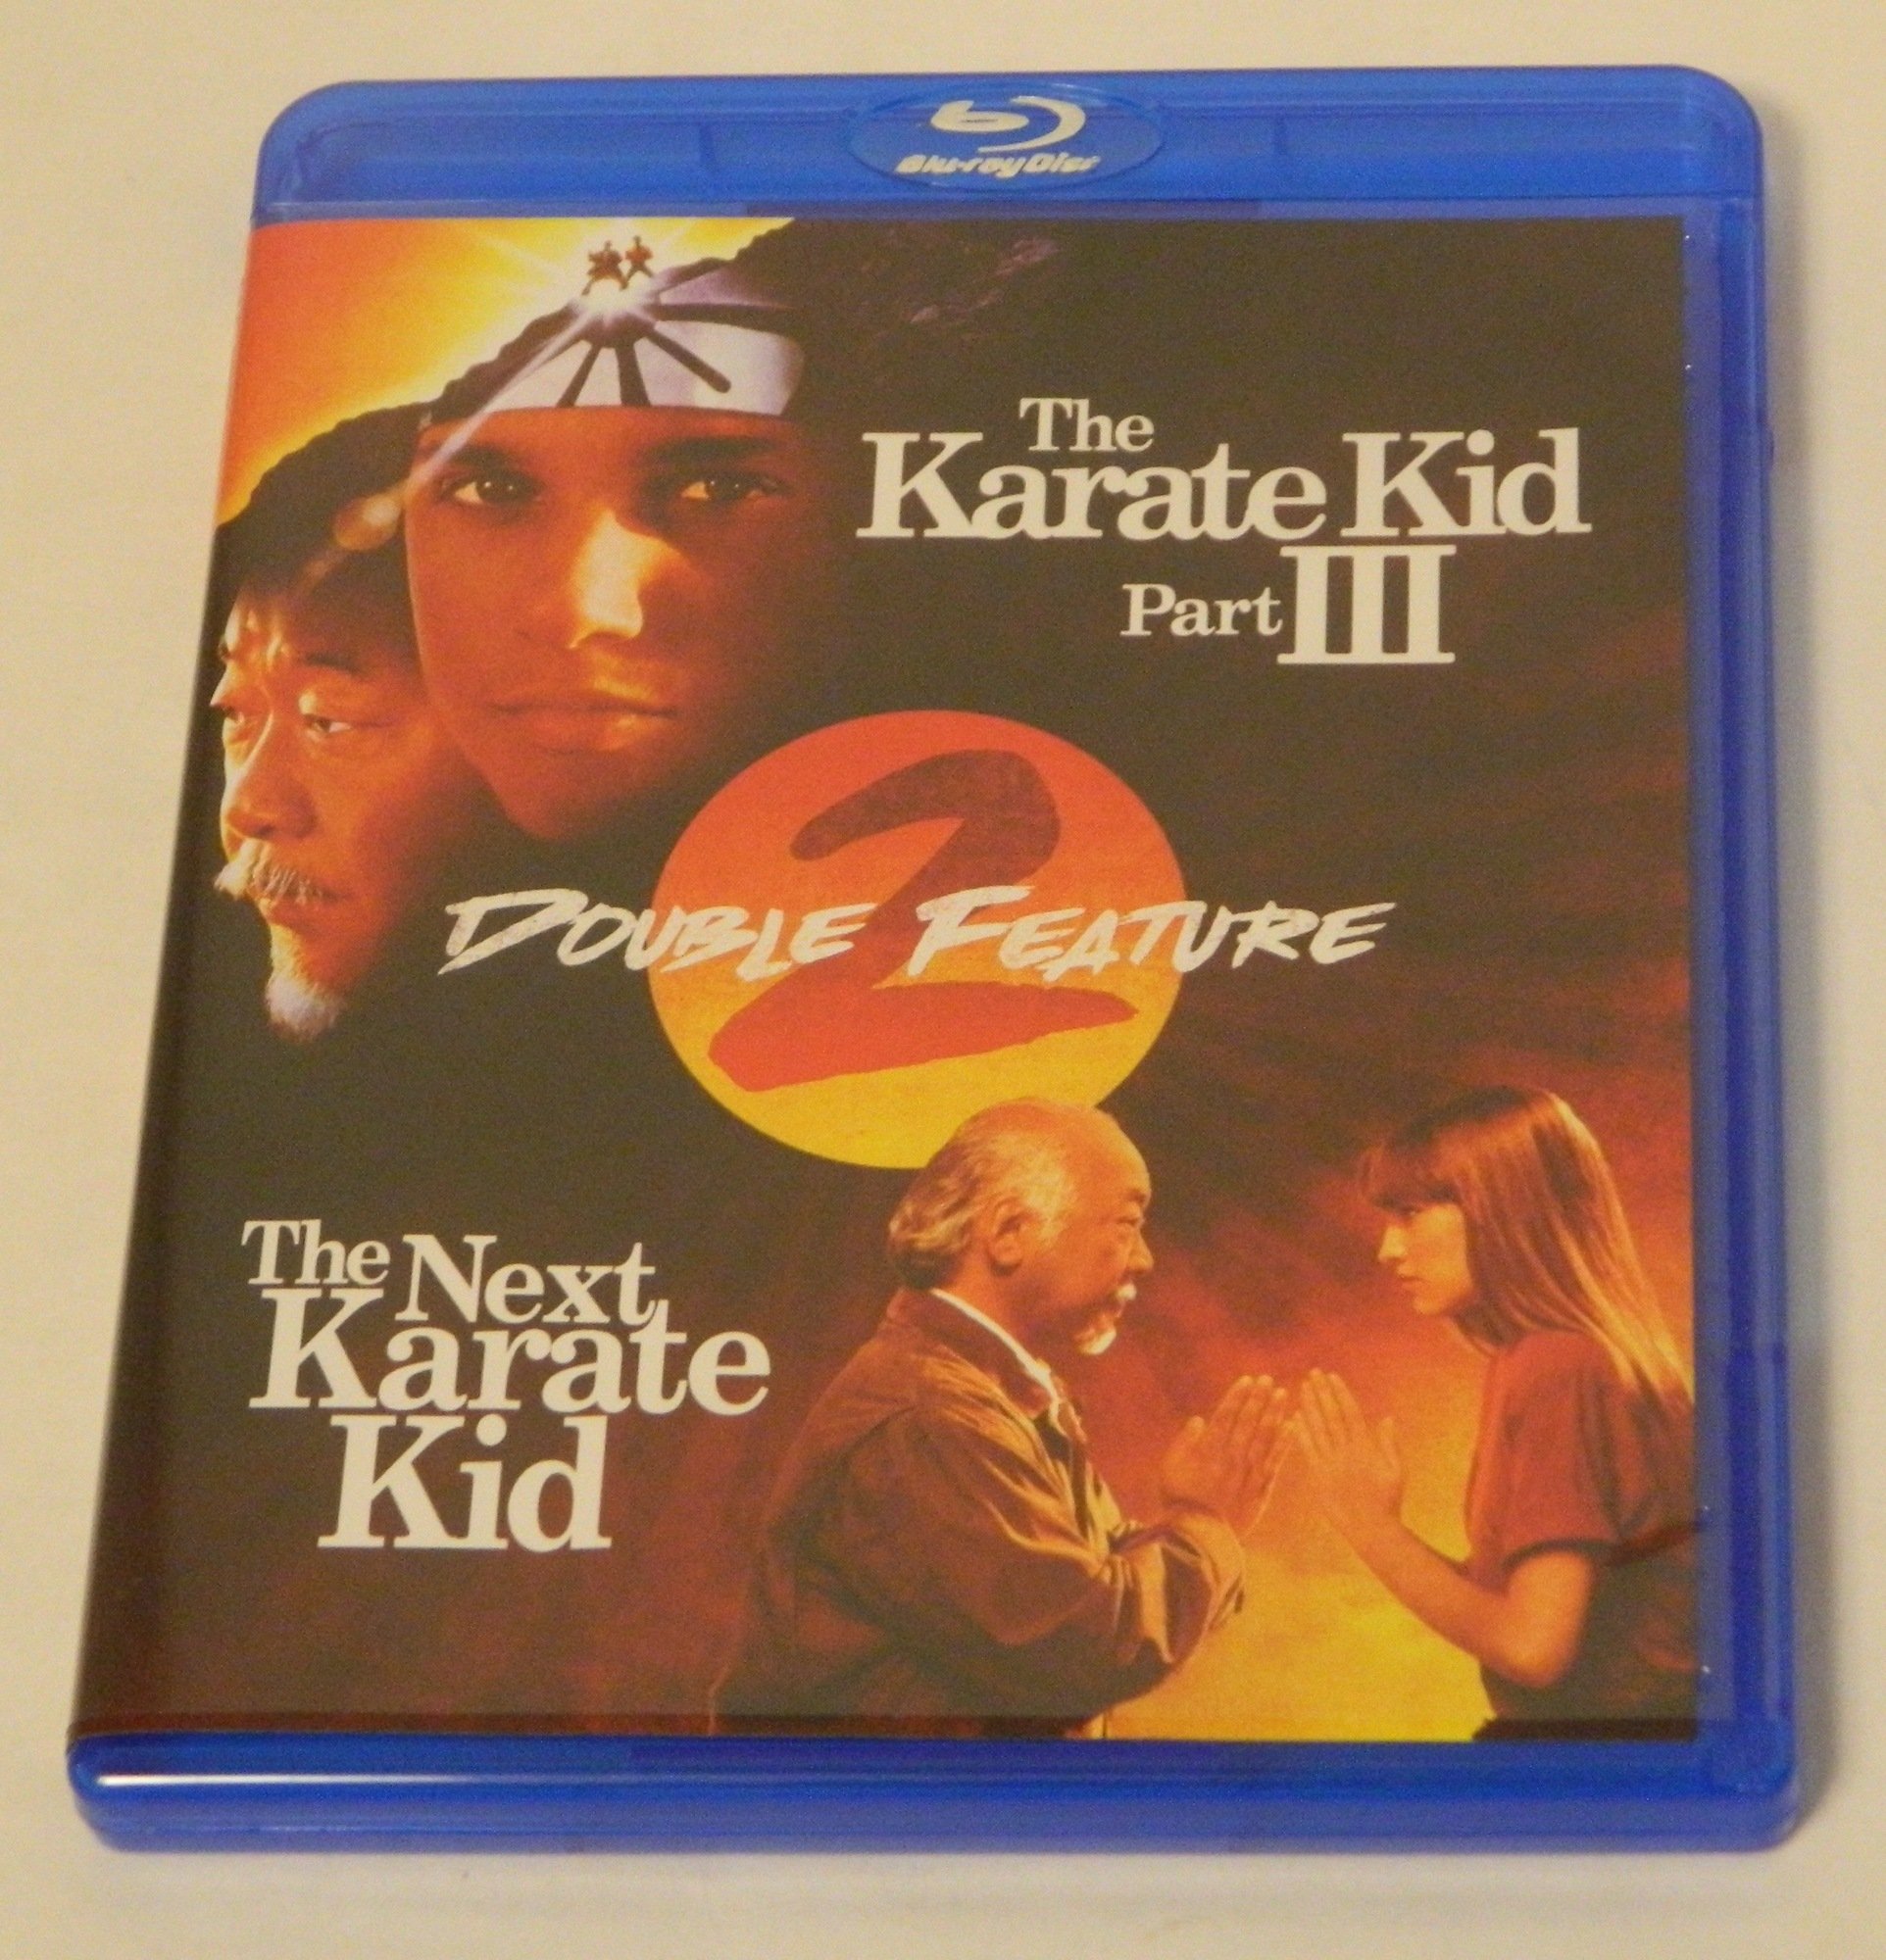 The Karate Kid Part III/The Next Karate Kid Double Feature Blu-ray Review